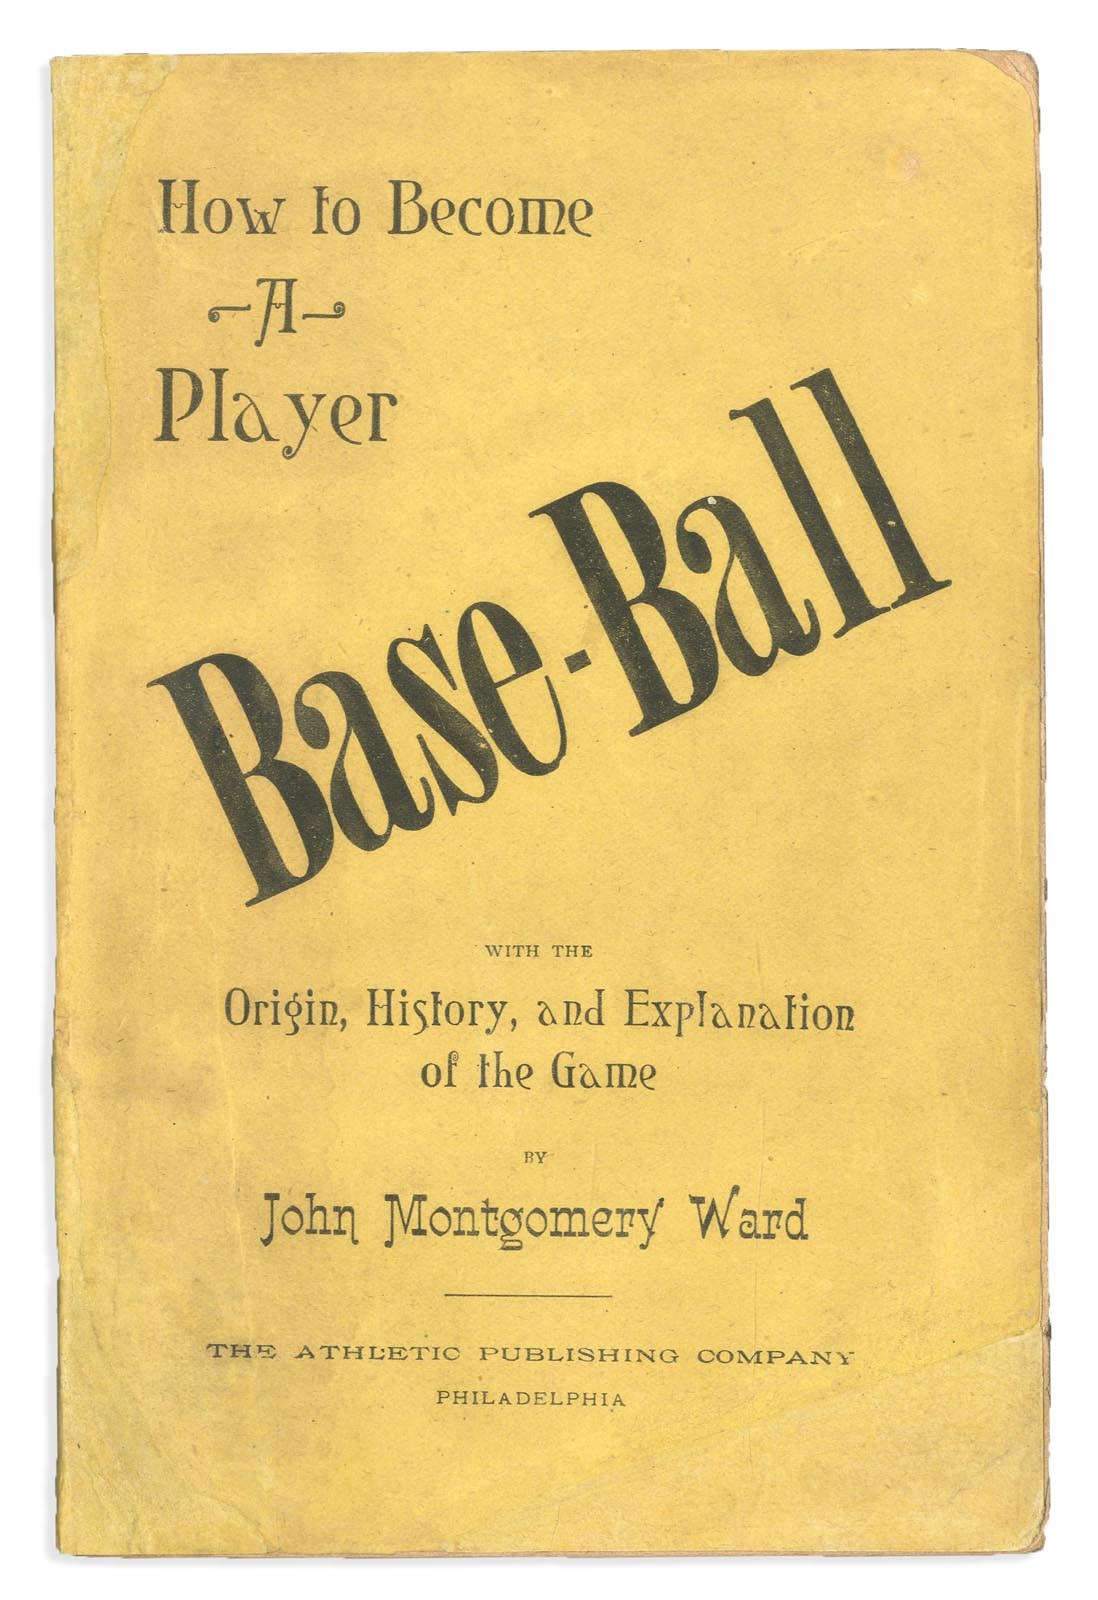 1888 "How to Become a Player" by John Montgomery Ward